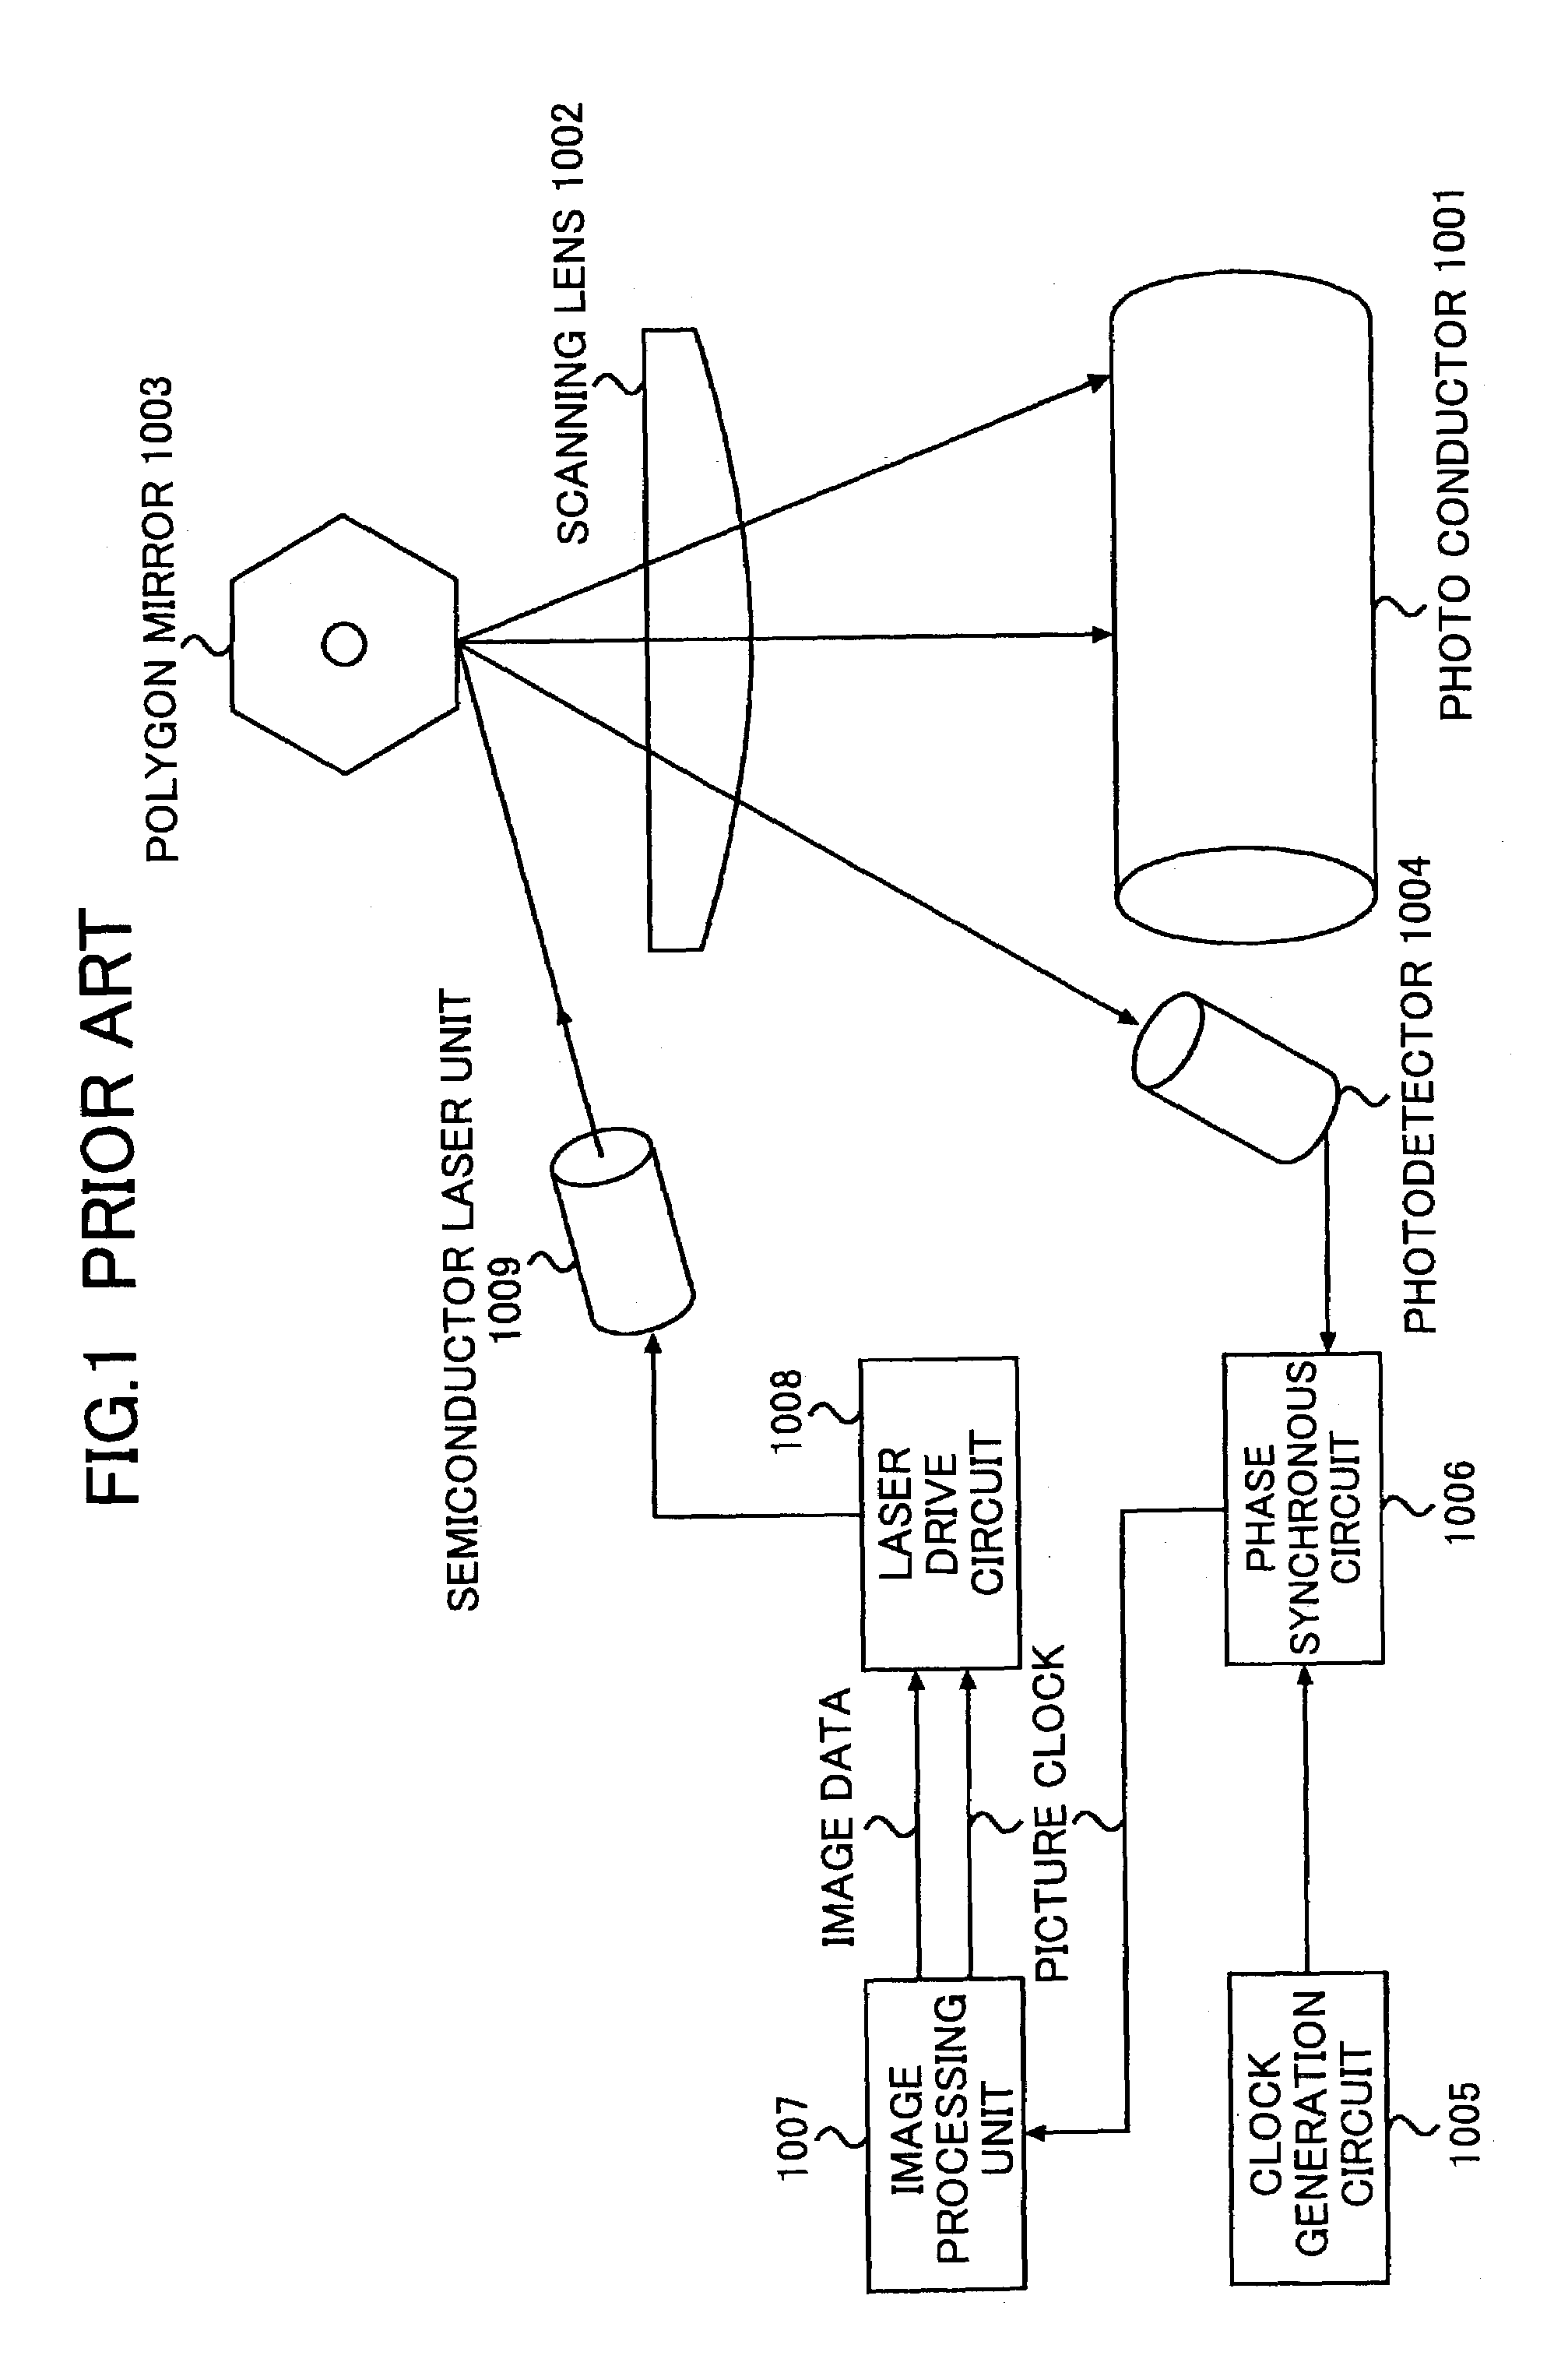 Pixel clock generation device causing state transition of pixel clock according to detected state transition and phase data indicating phase shift amount